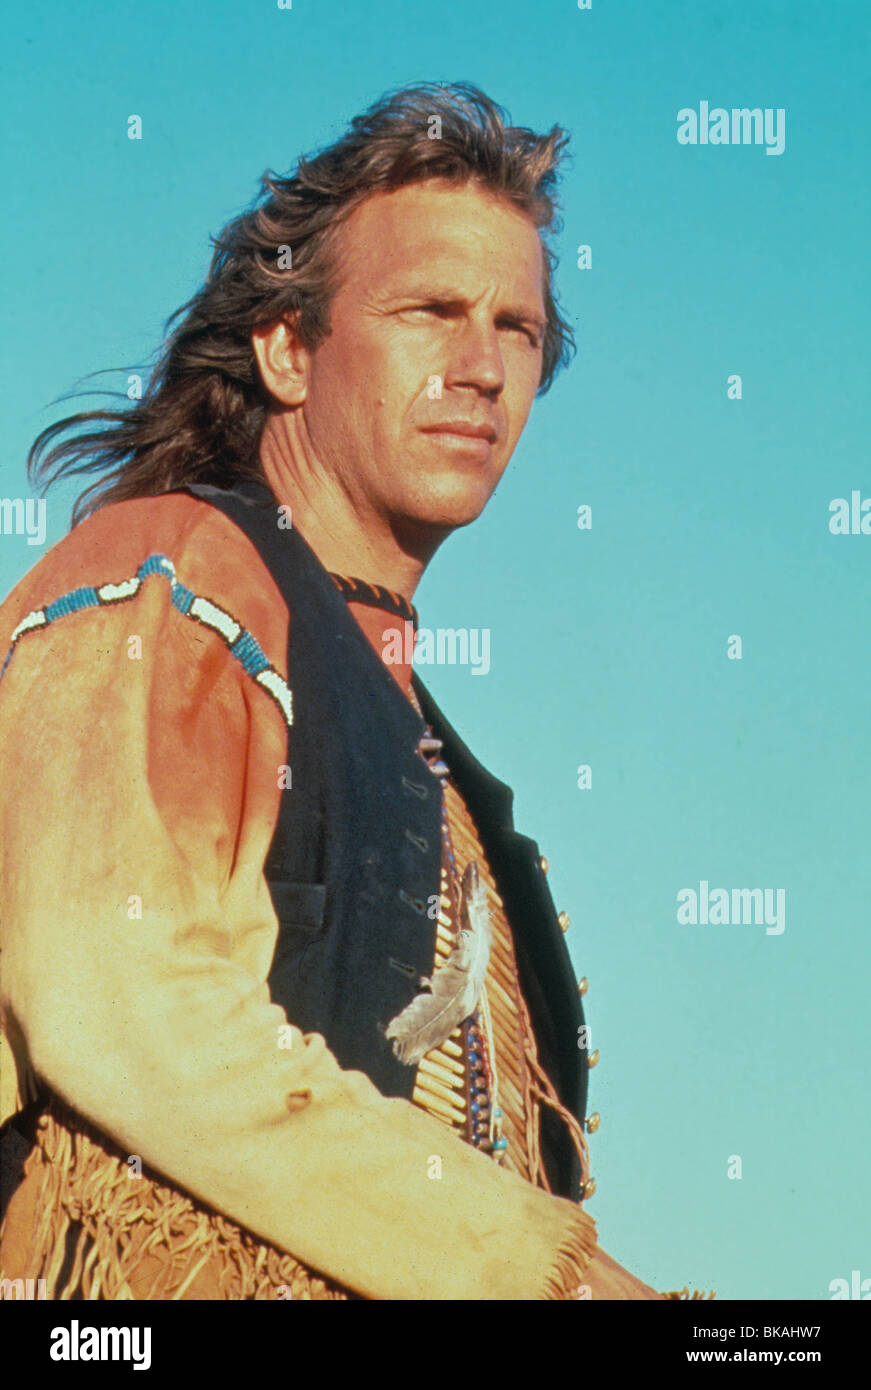 DANCES WITH WOLVES (1990) KEVIN COSTNER DWW 009 Stock Photo